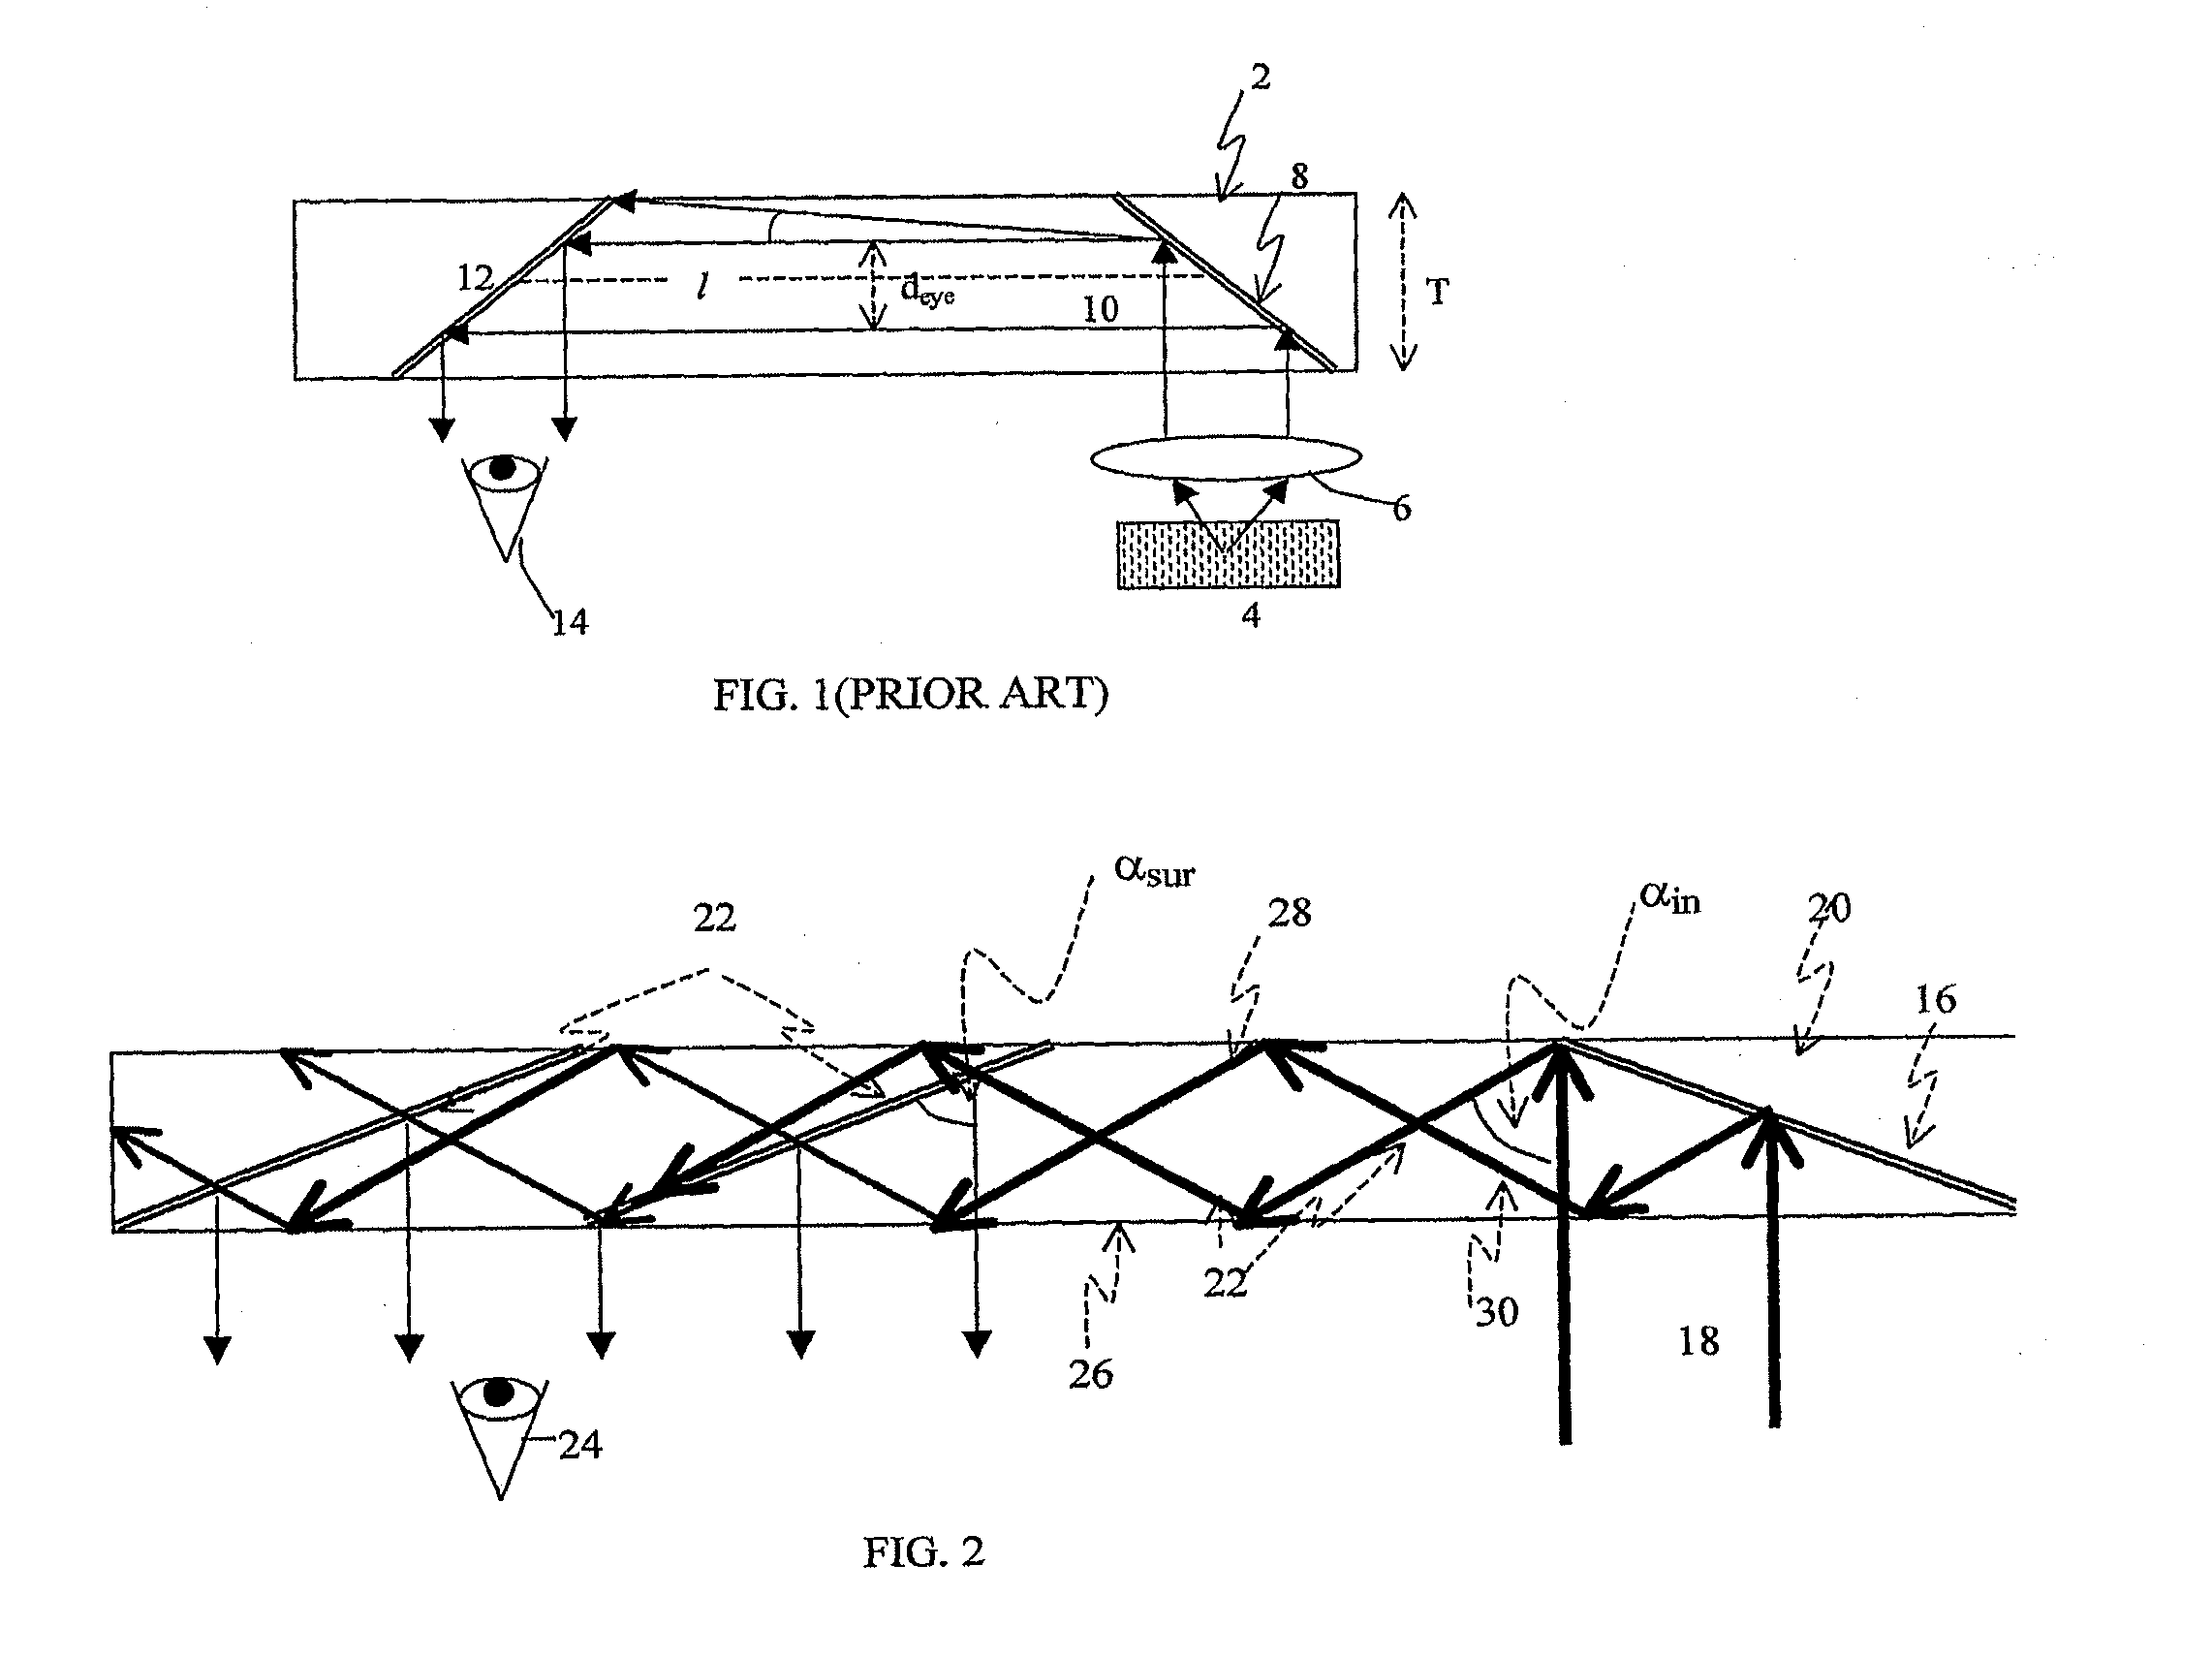 Substrate-Guide Optical Device